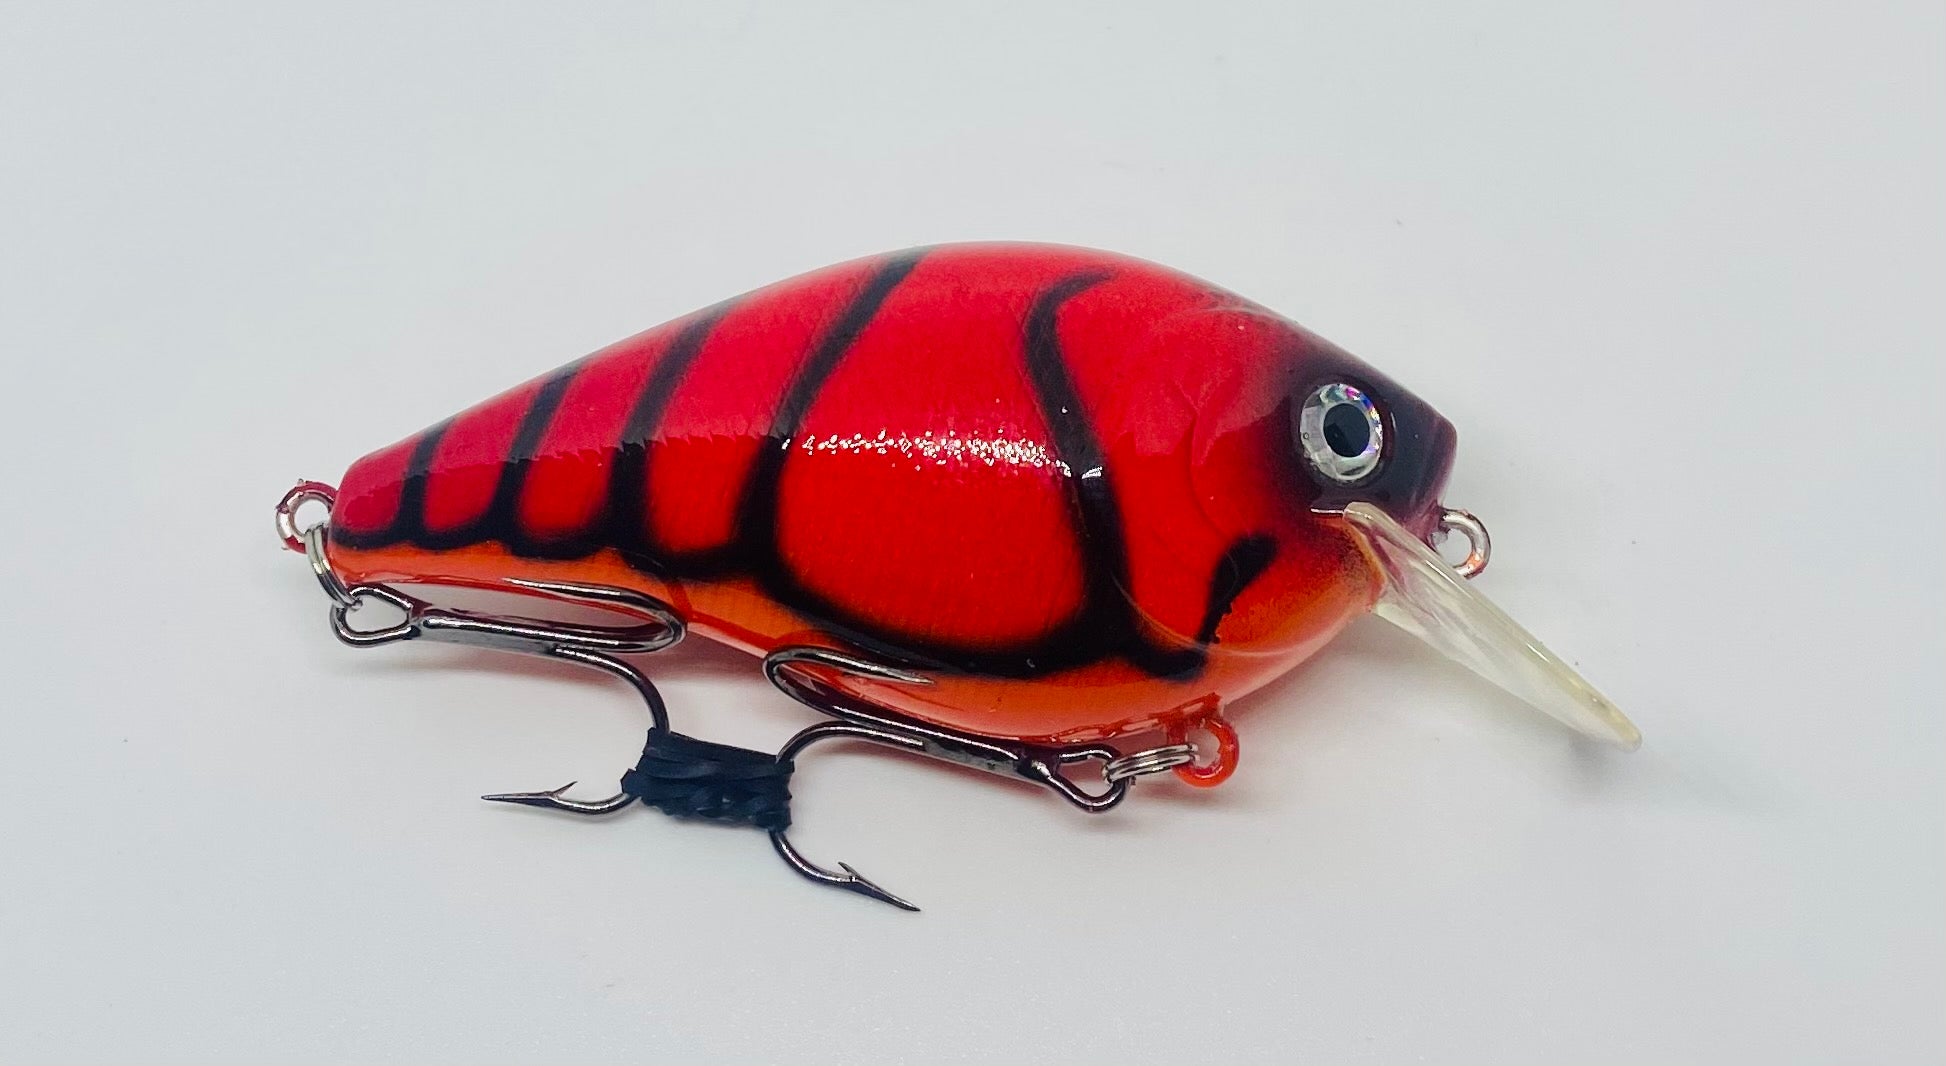 square bill crankbait, square bill crankbait Suppliers and